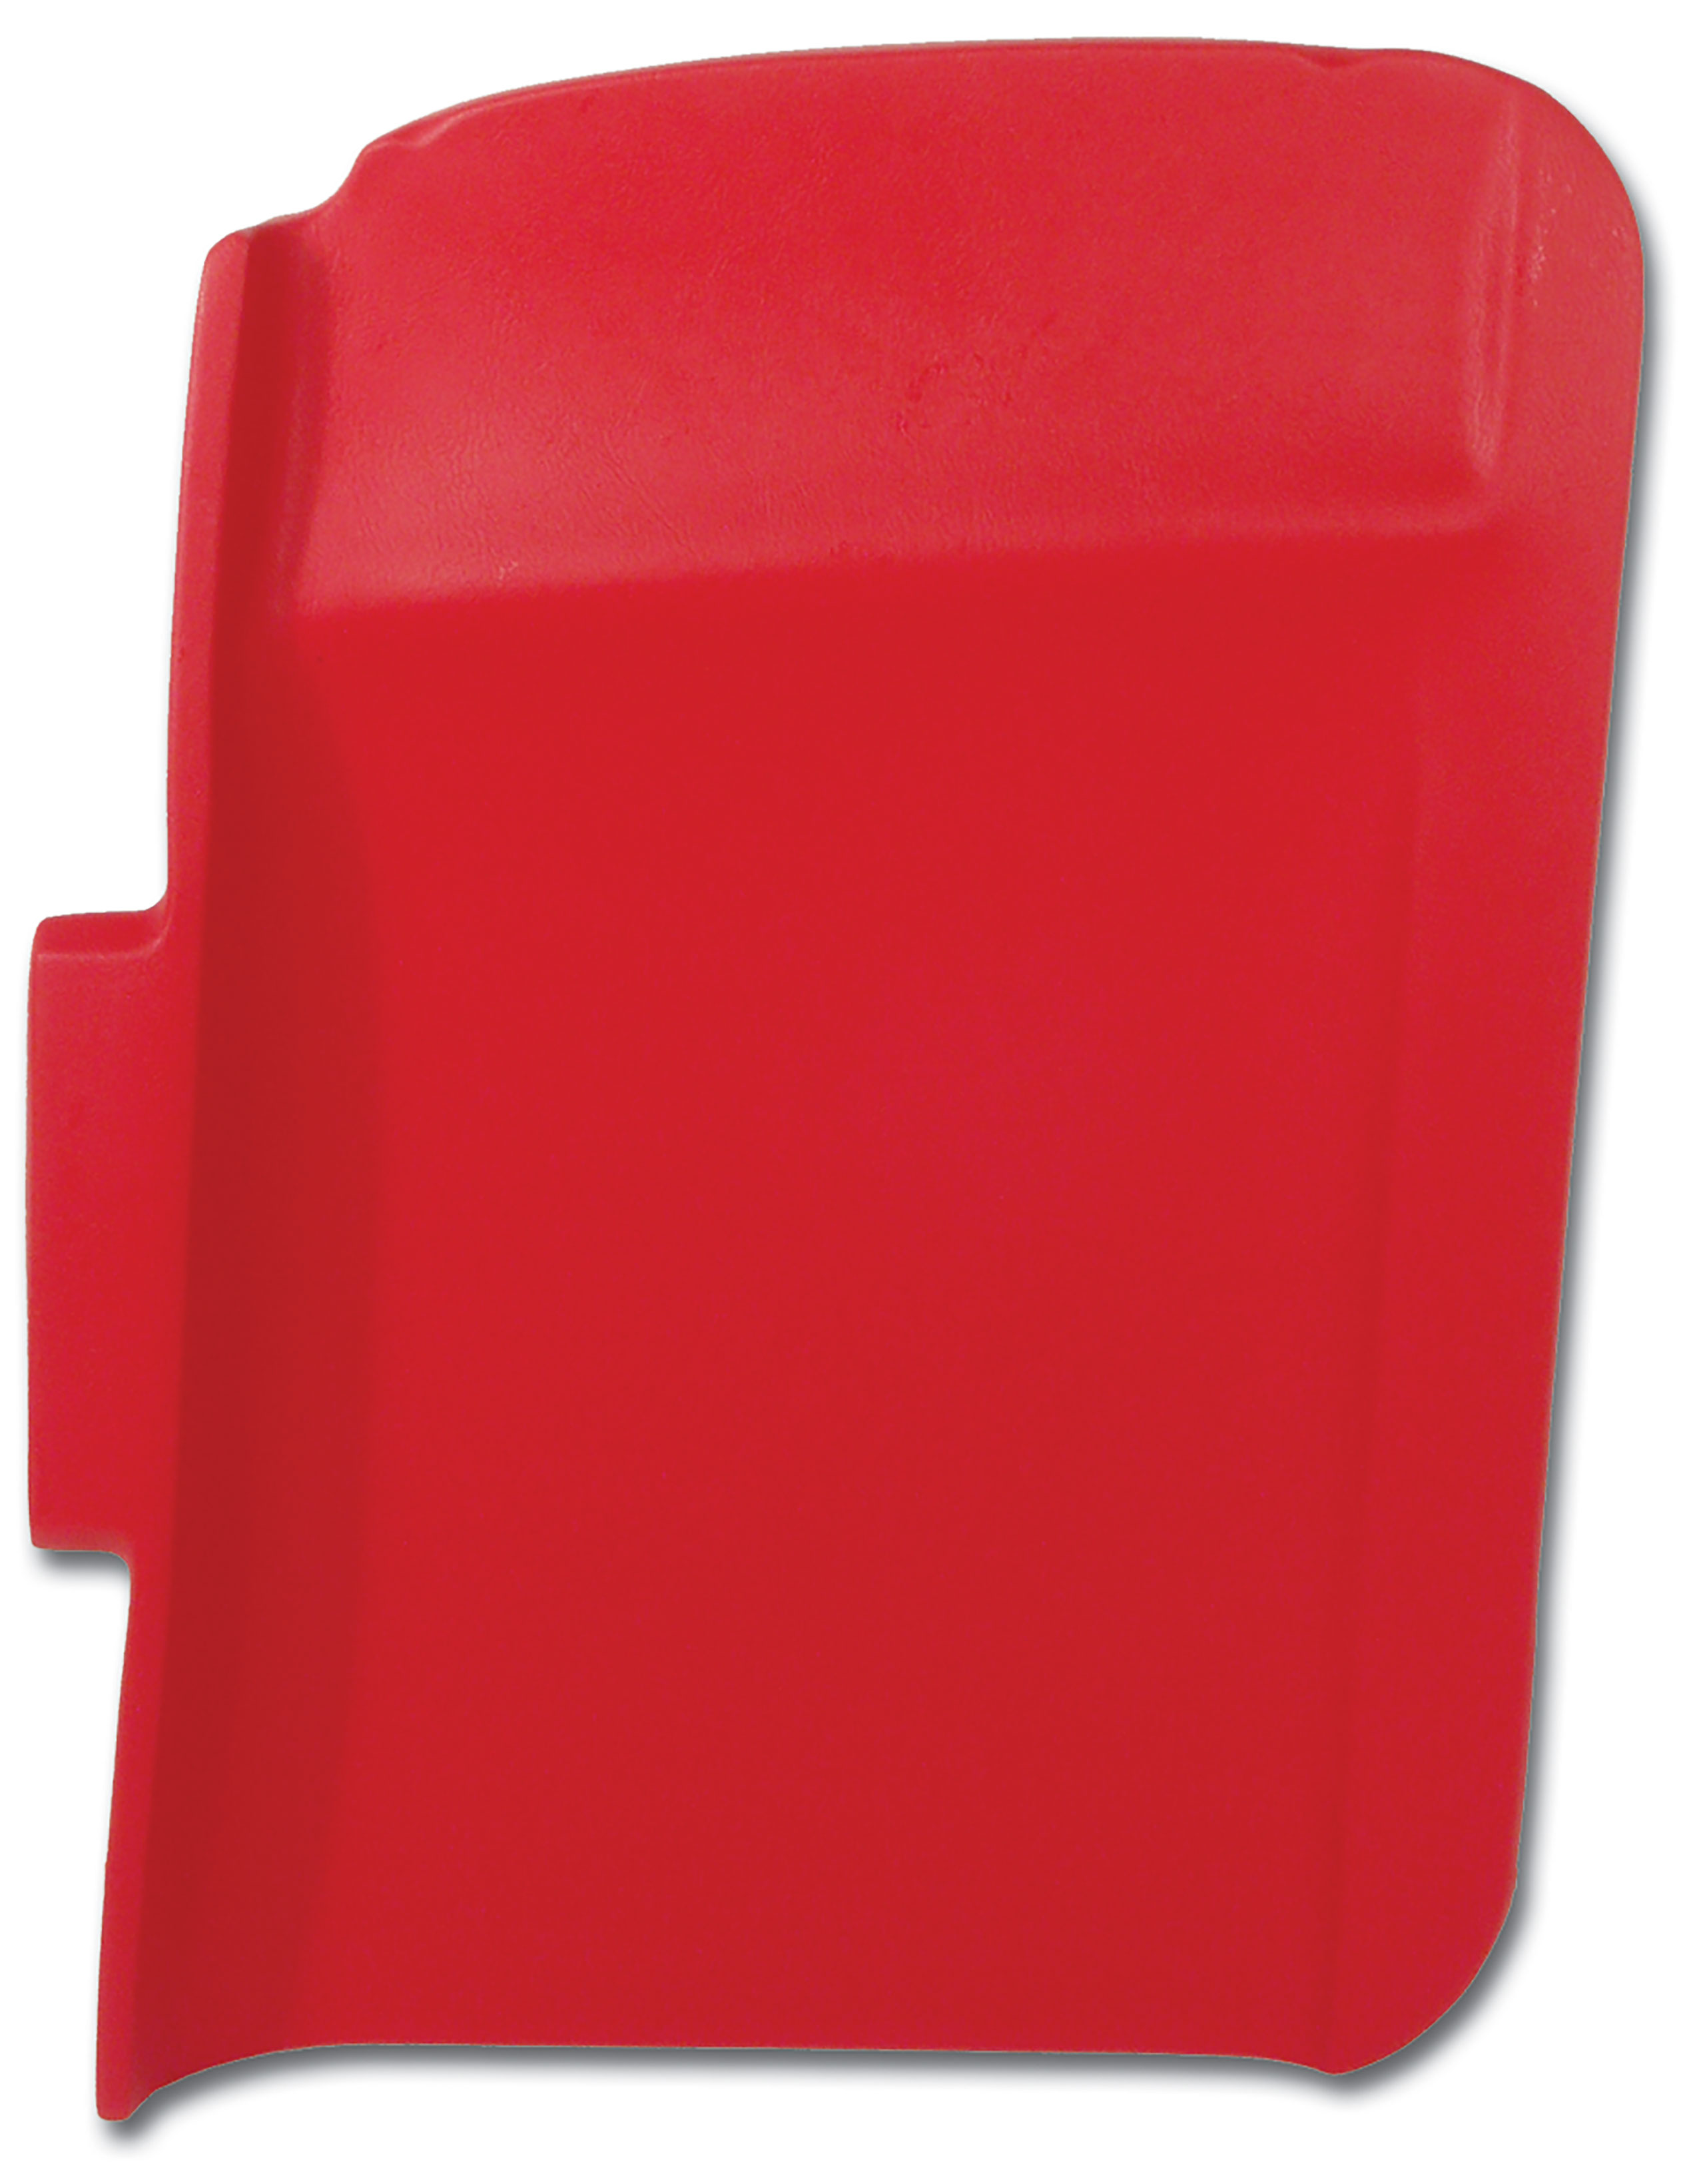 T-Top Pad- Red RH For 1968-1972 Corvette